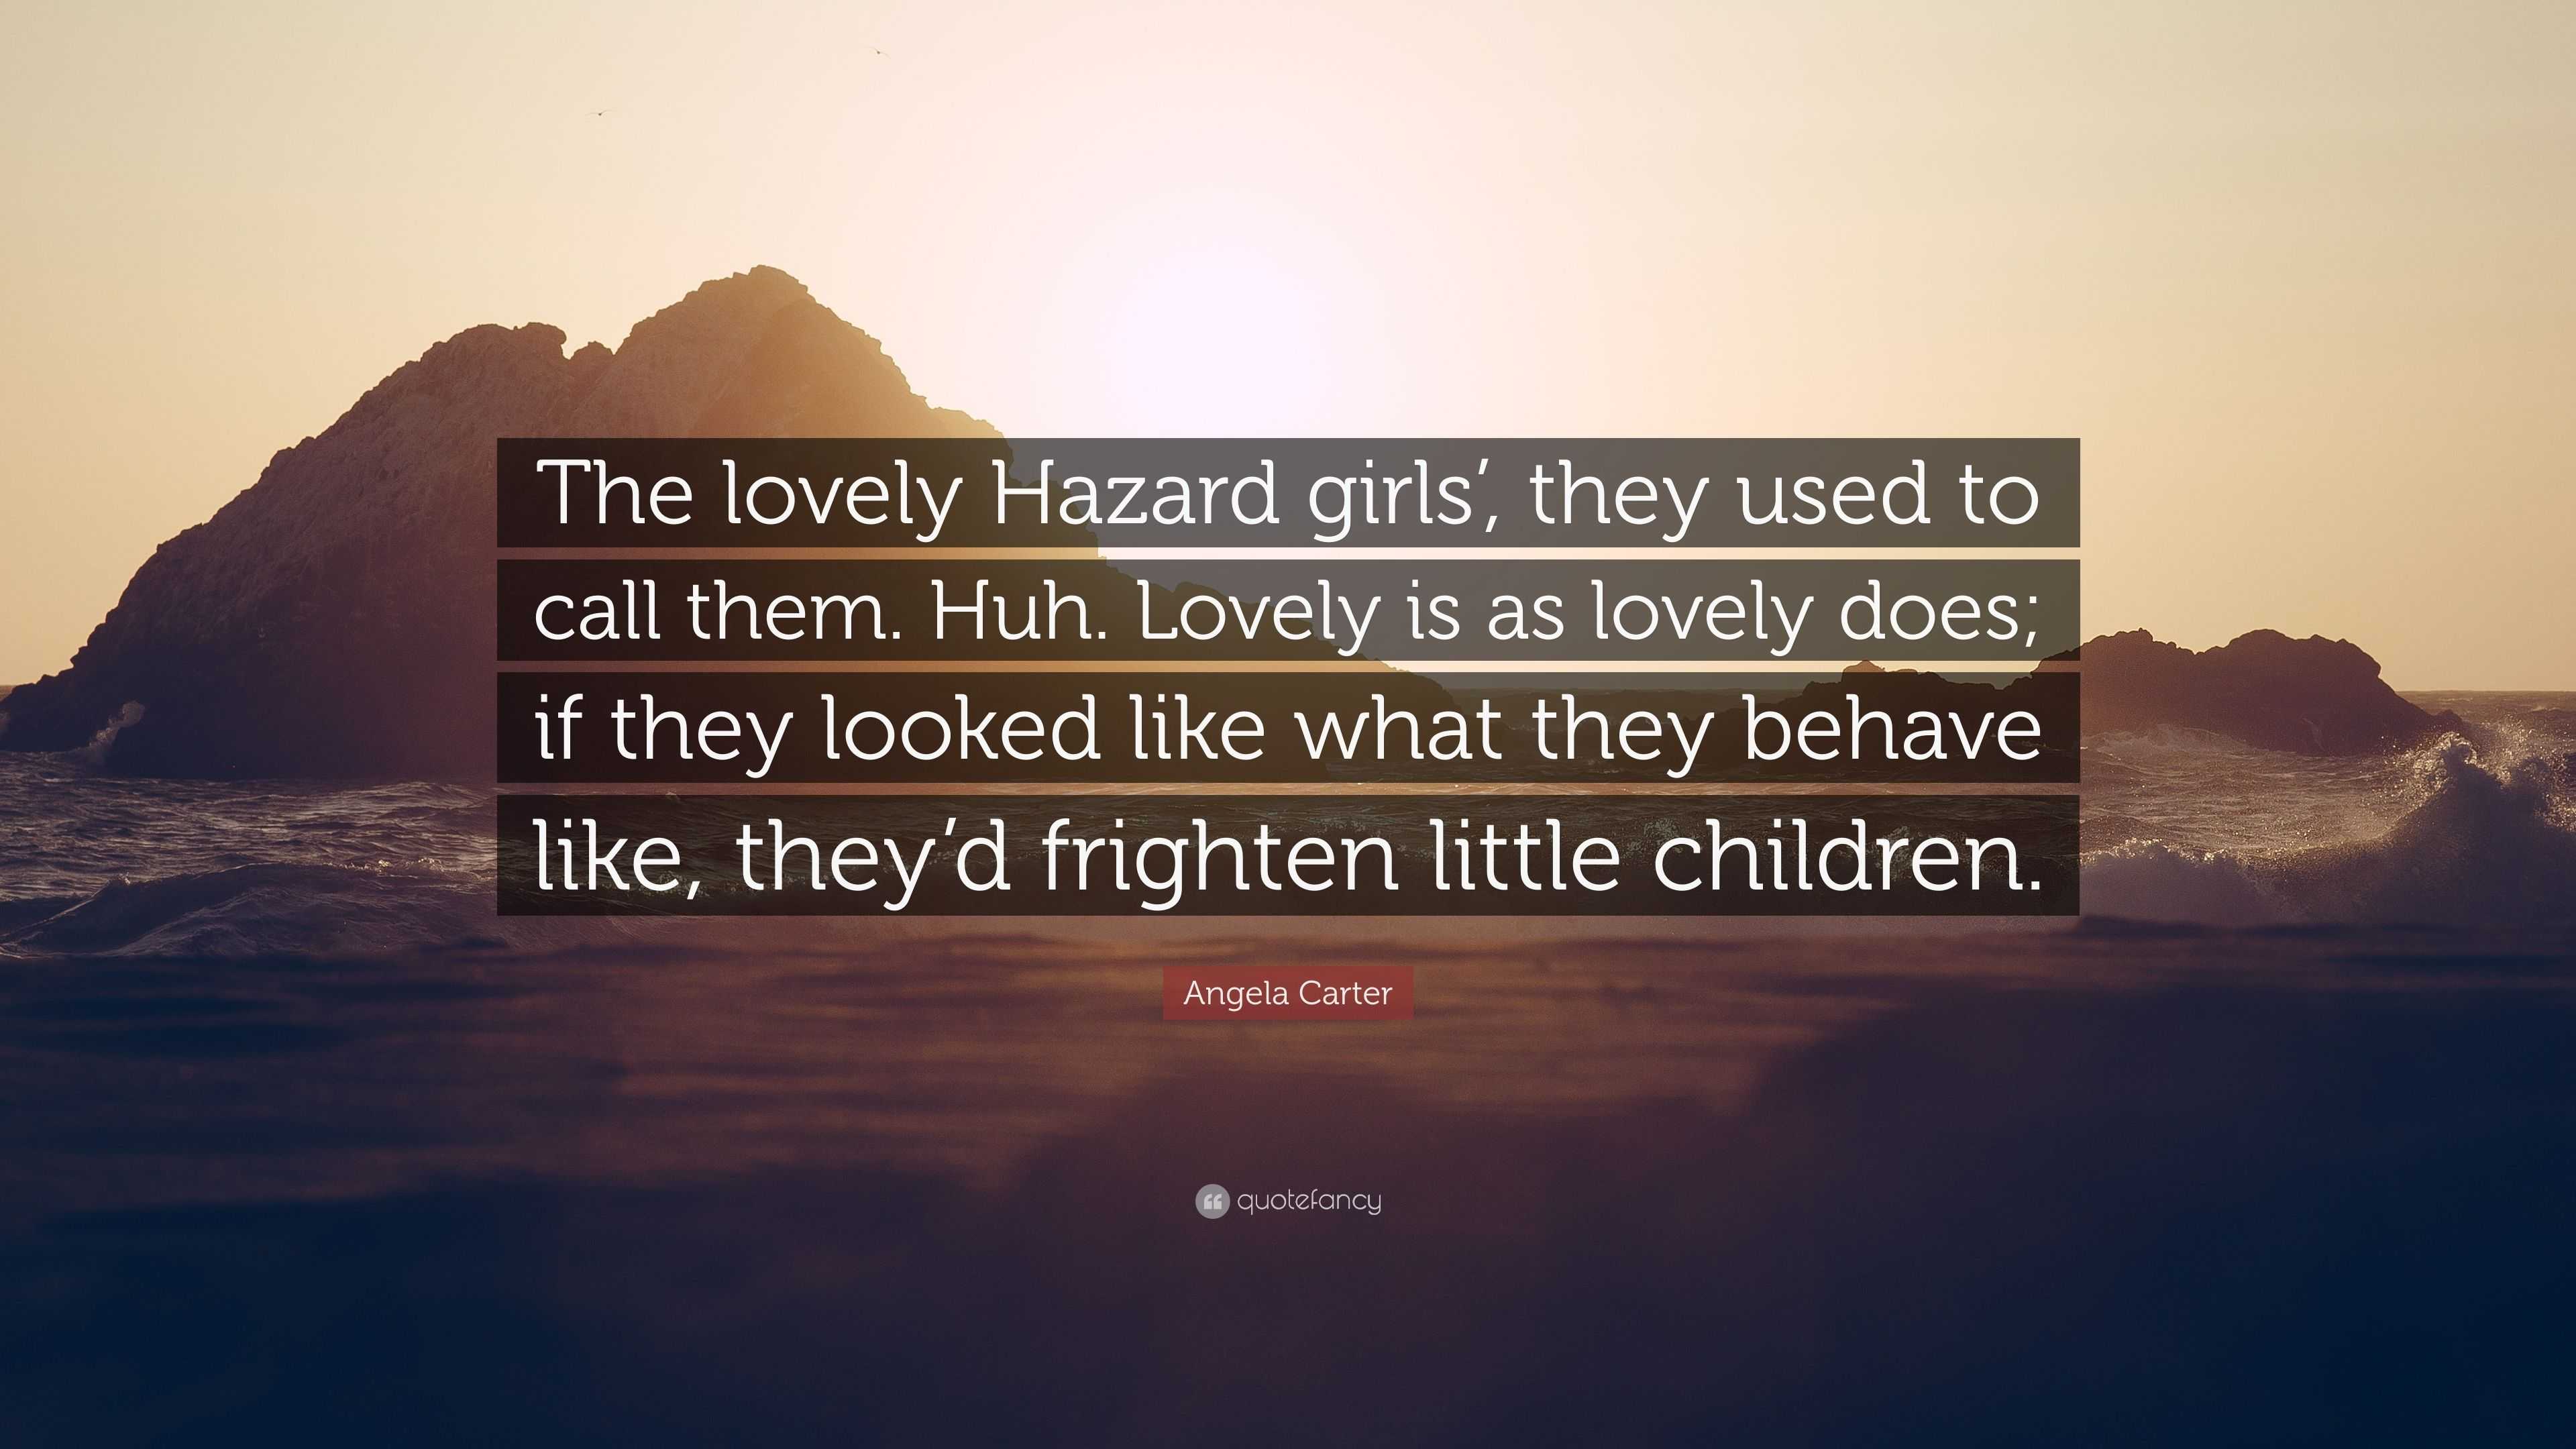 Angela Carter Quote: "The lovely Hazard girls', they used ...